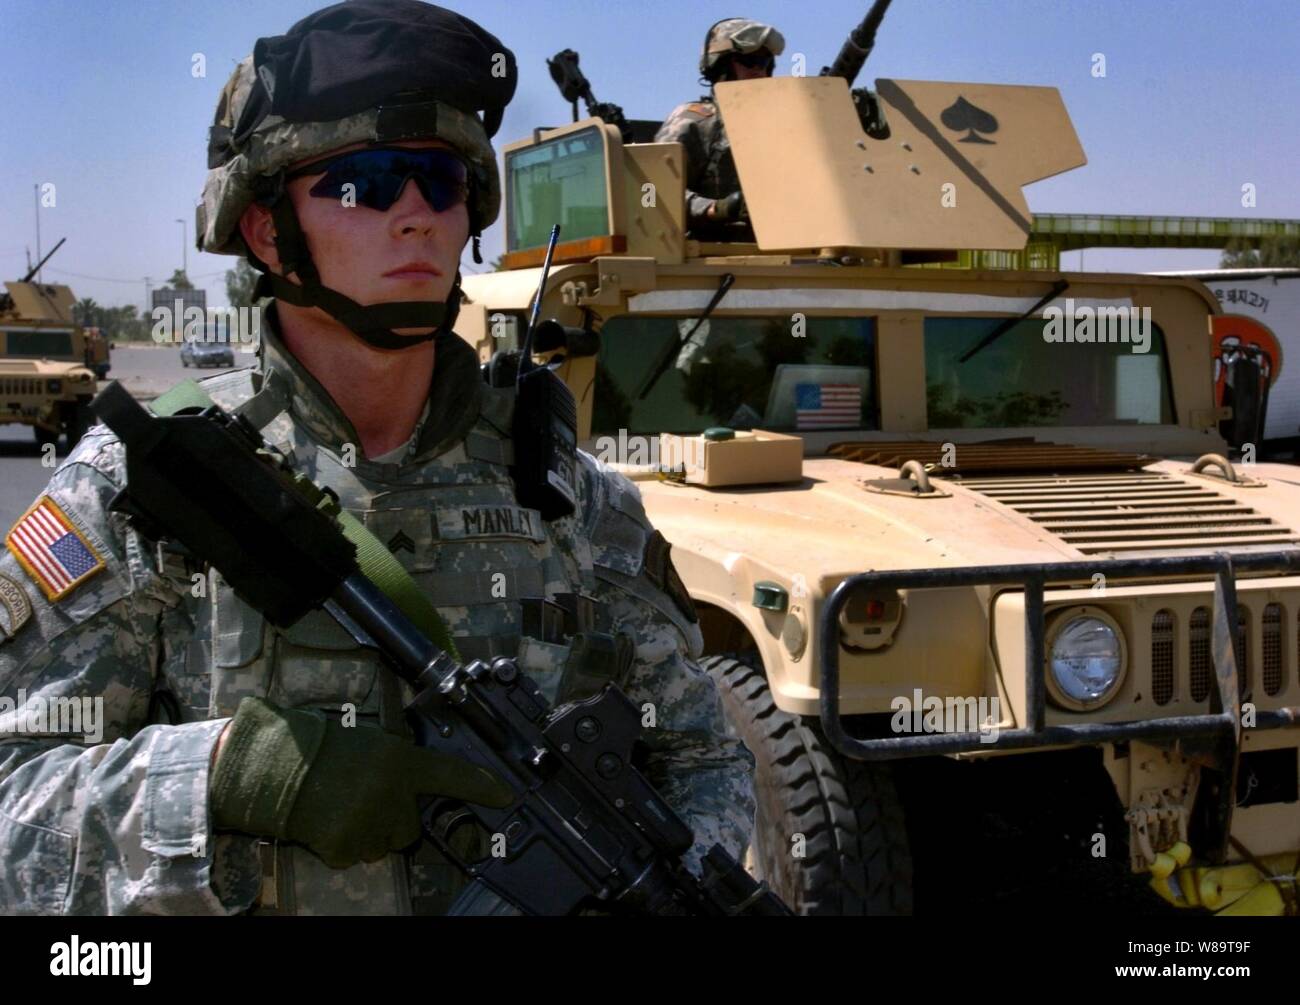 U.S. Army Sgt. Jason Manley conducts a dismounted patrol in Adhamiya near Baghdad, Iraq, on June 27, 2006.  Manley is assigned to the 506th Regimental Combat Team, 101st Airborne Division. Stock Photo